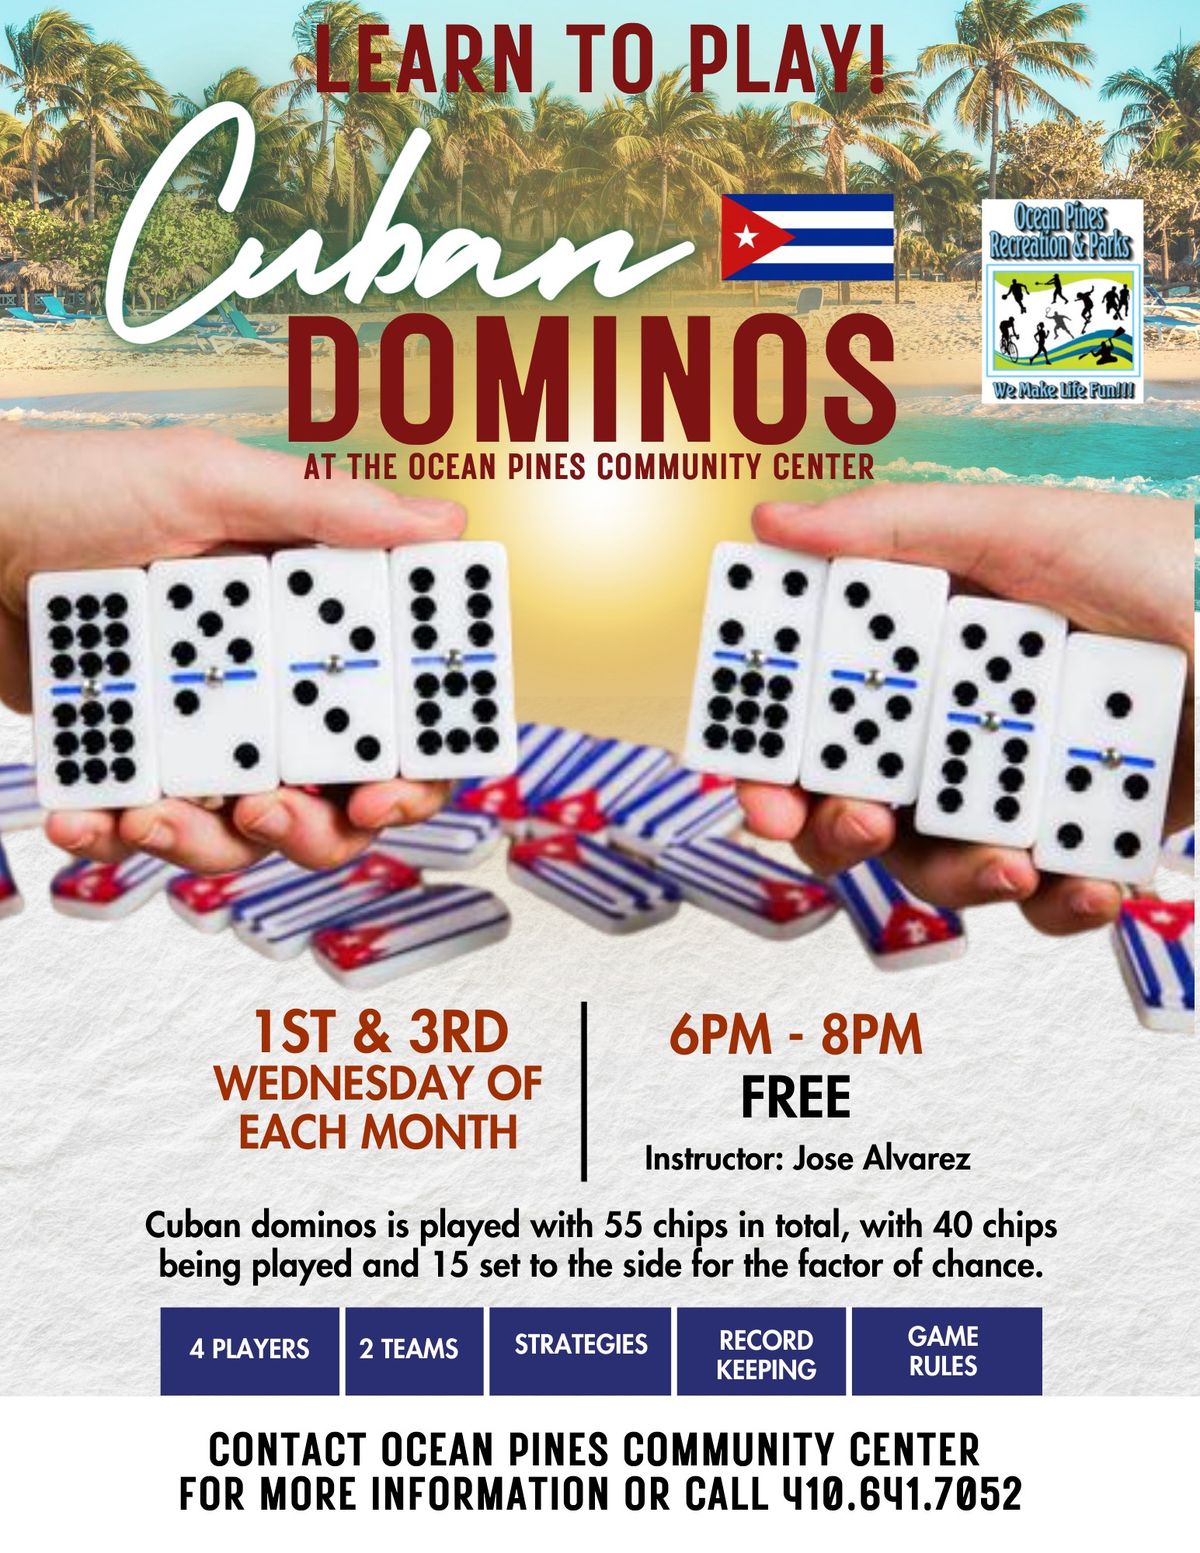 Learn to Play Cuban Dominos! - FREE